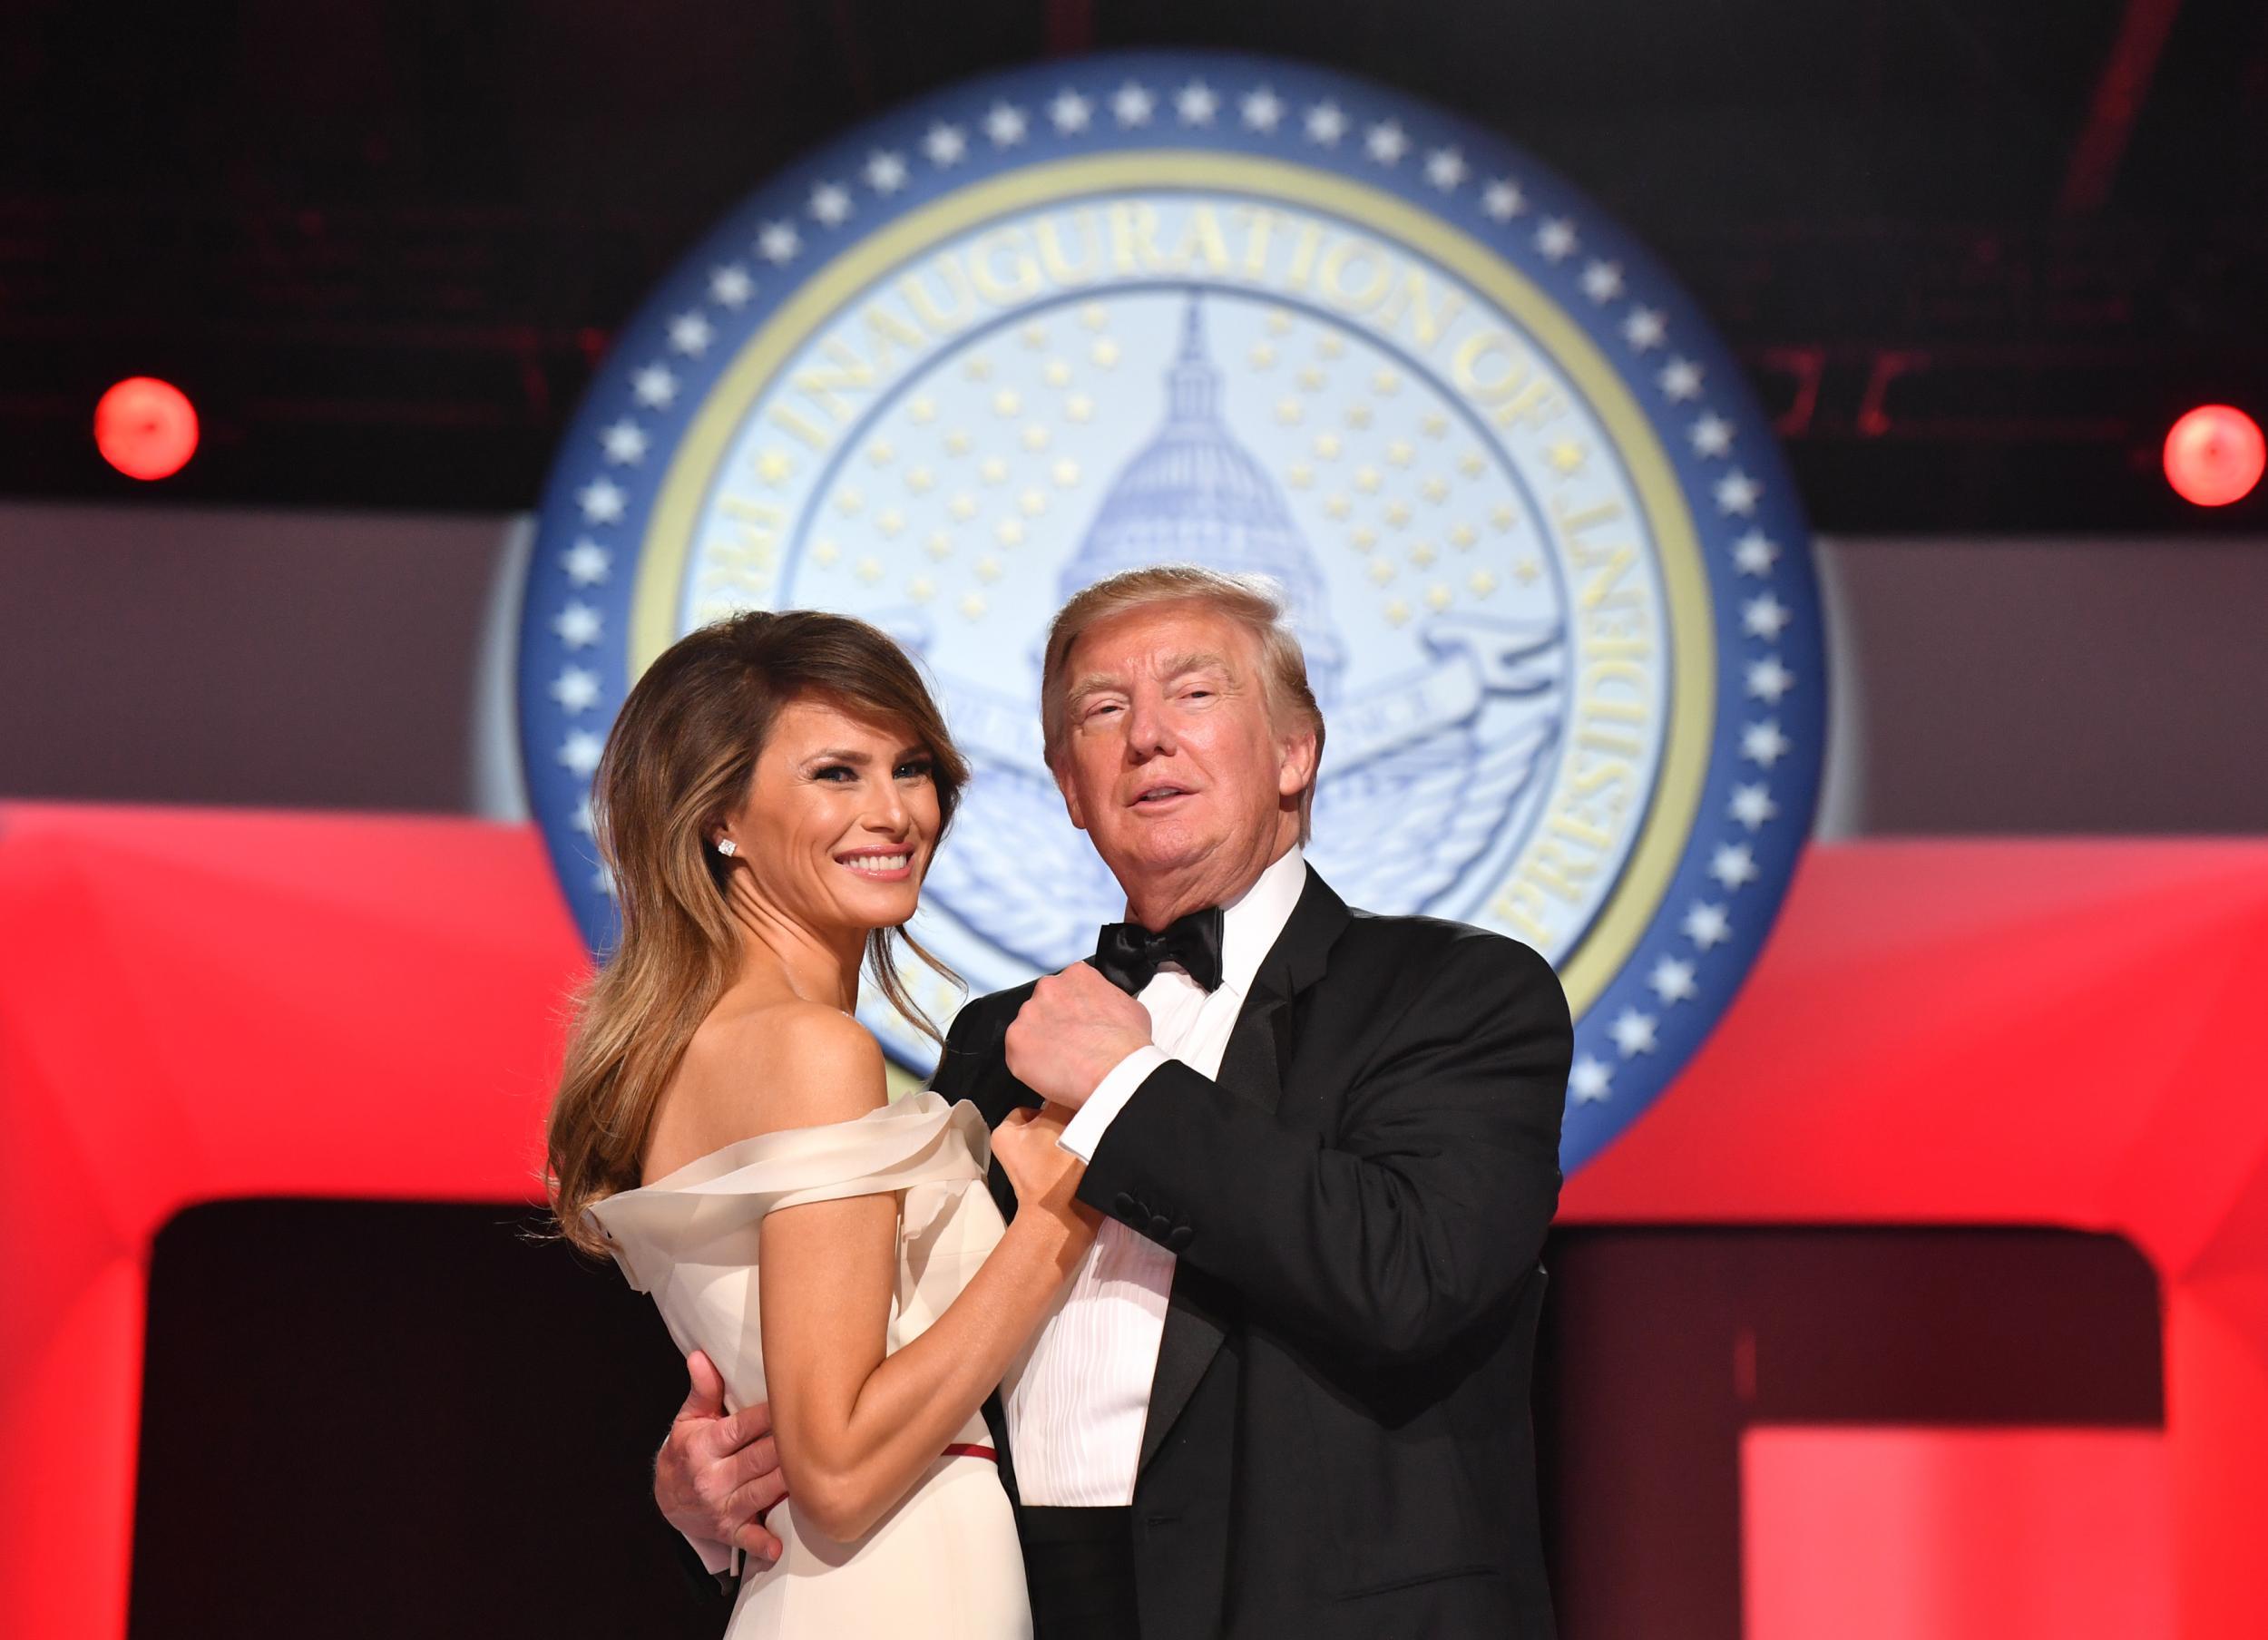 The Trumps at the Freedom Ball celebrating the inauguration, for which $107m was raised